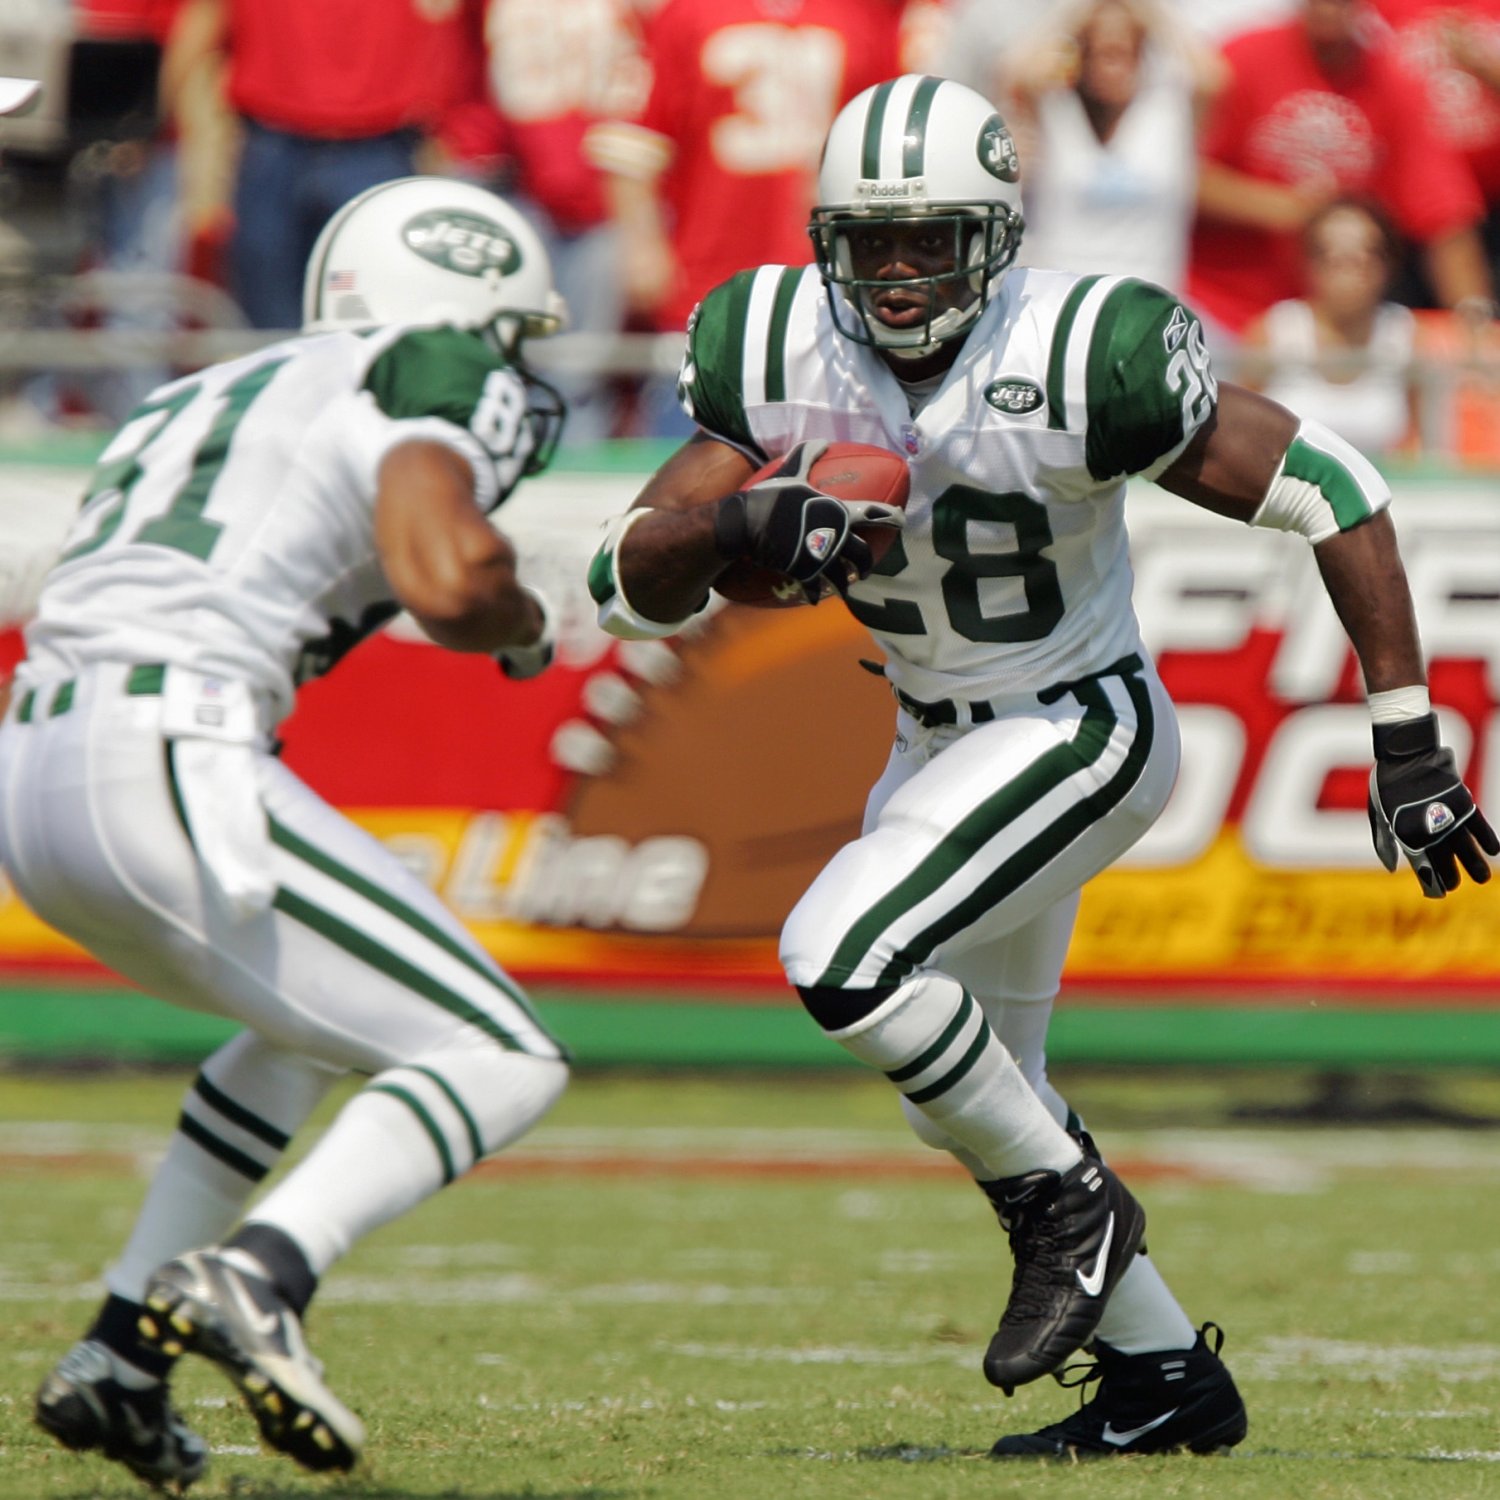 Curtis Martin Elected to NFL Hall of Fame on 2nd Try | Bleacher Report